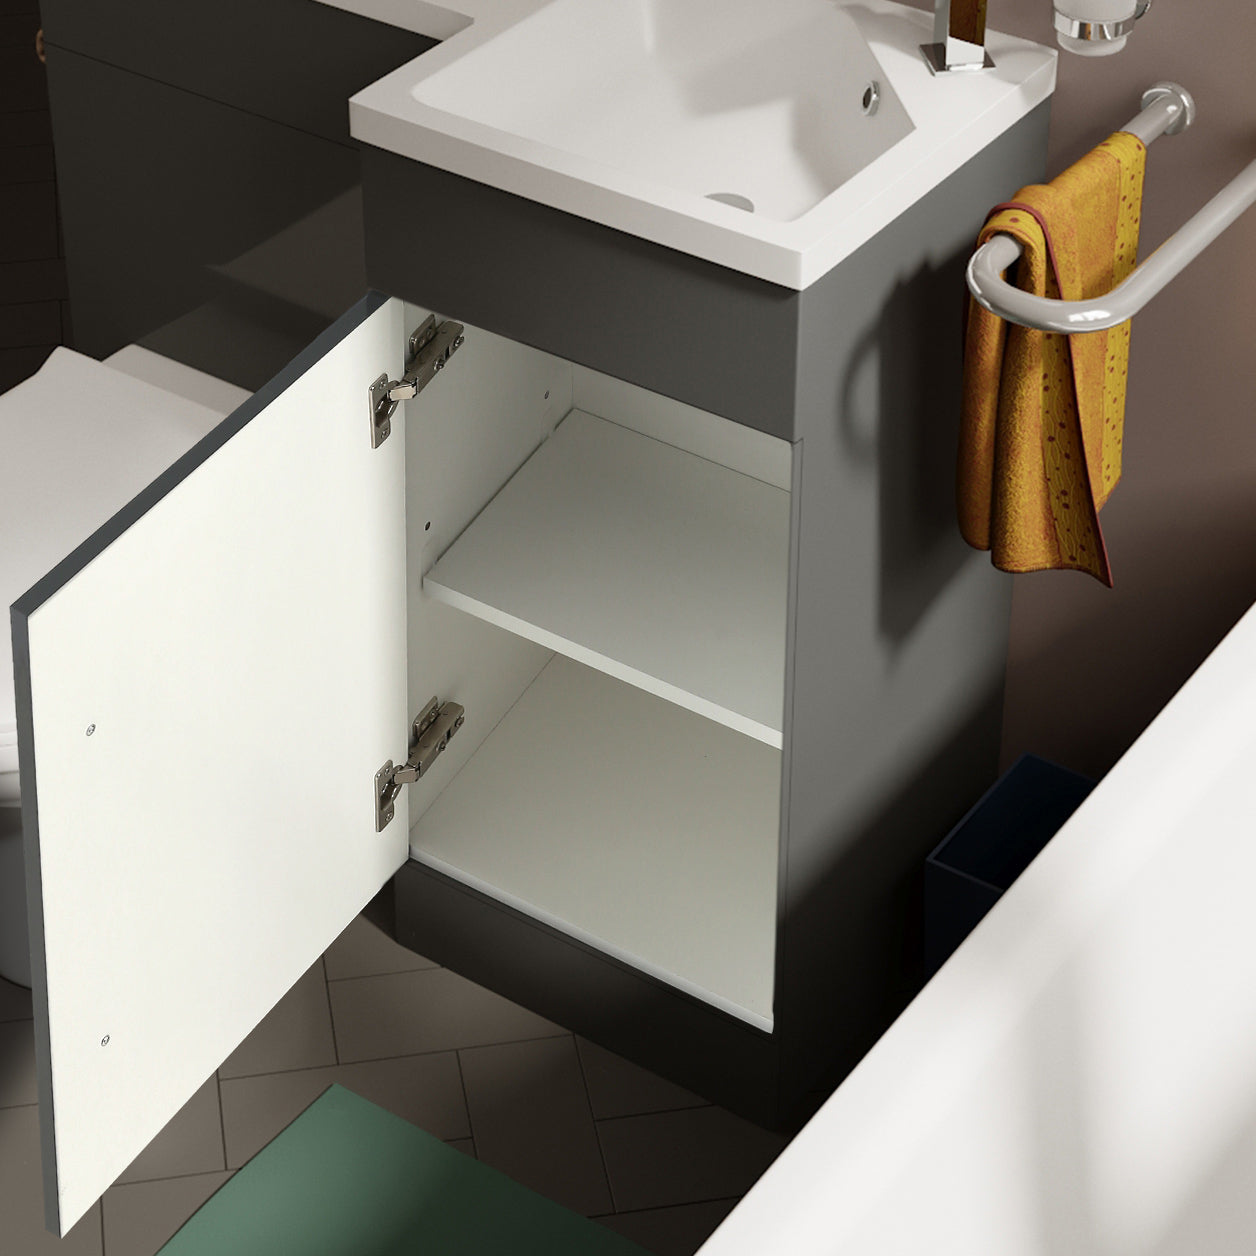 Jersey Flat Packed Compact 900mm Grey L-Shape Right Hand Vanity Unit and Toilet Bathroom